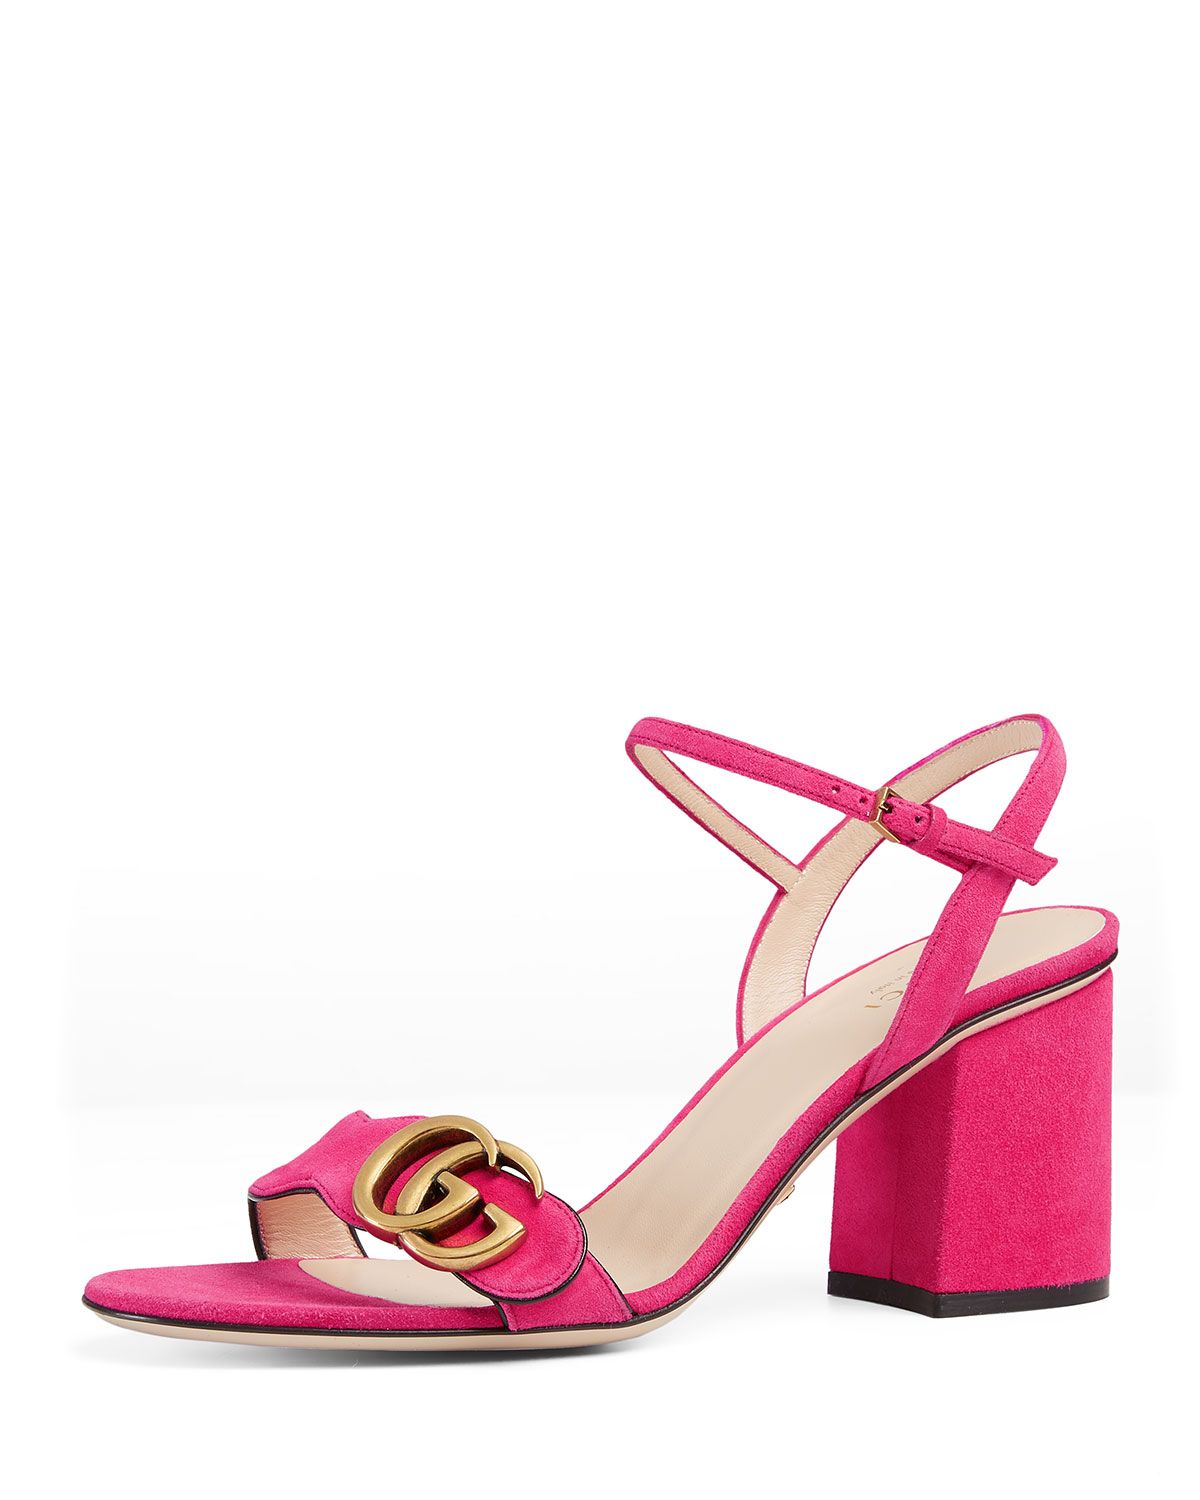 Marmont Suede 75mm Sandal, Pink | Neiman Marcus